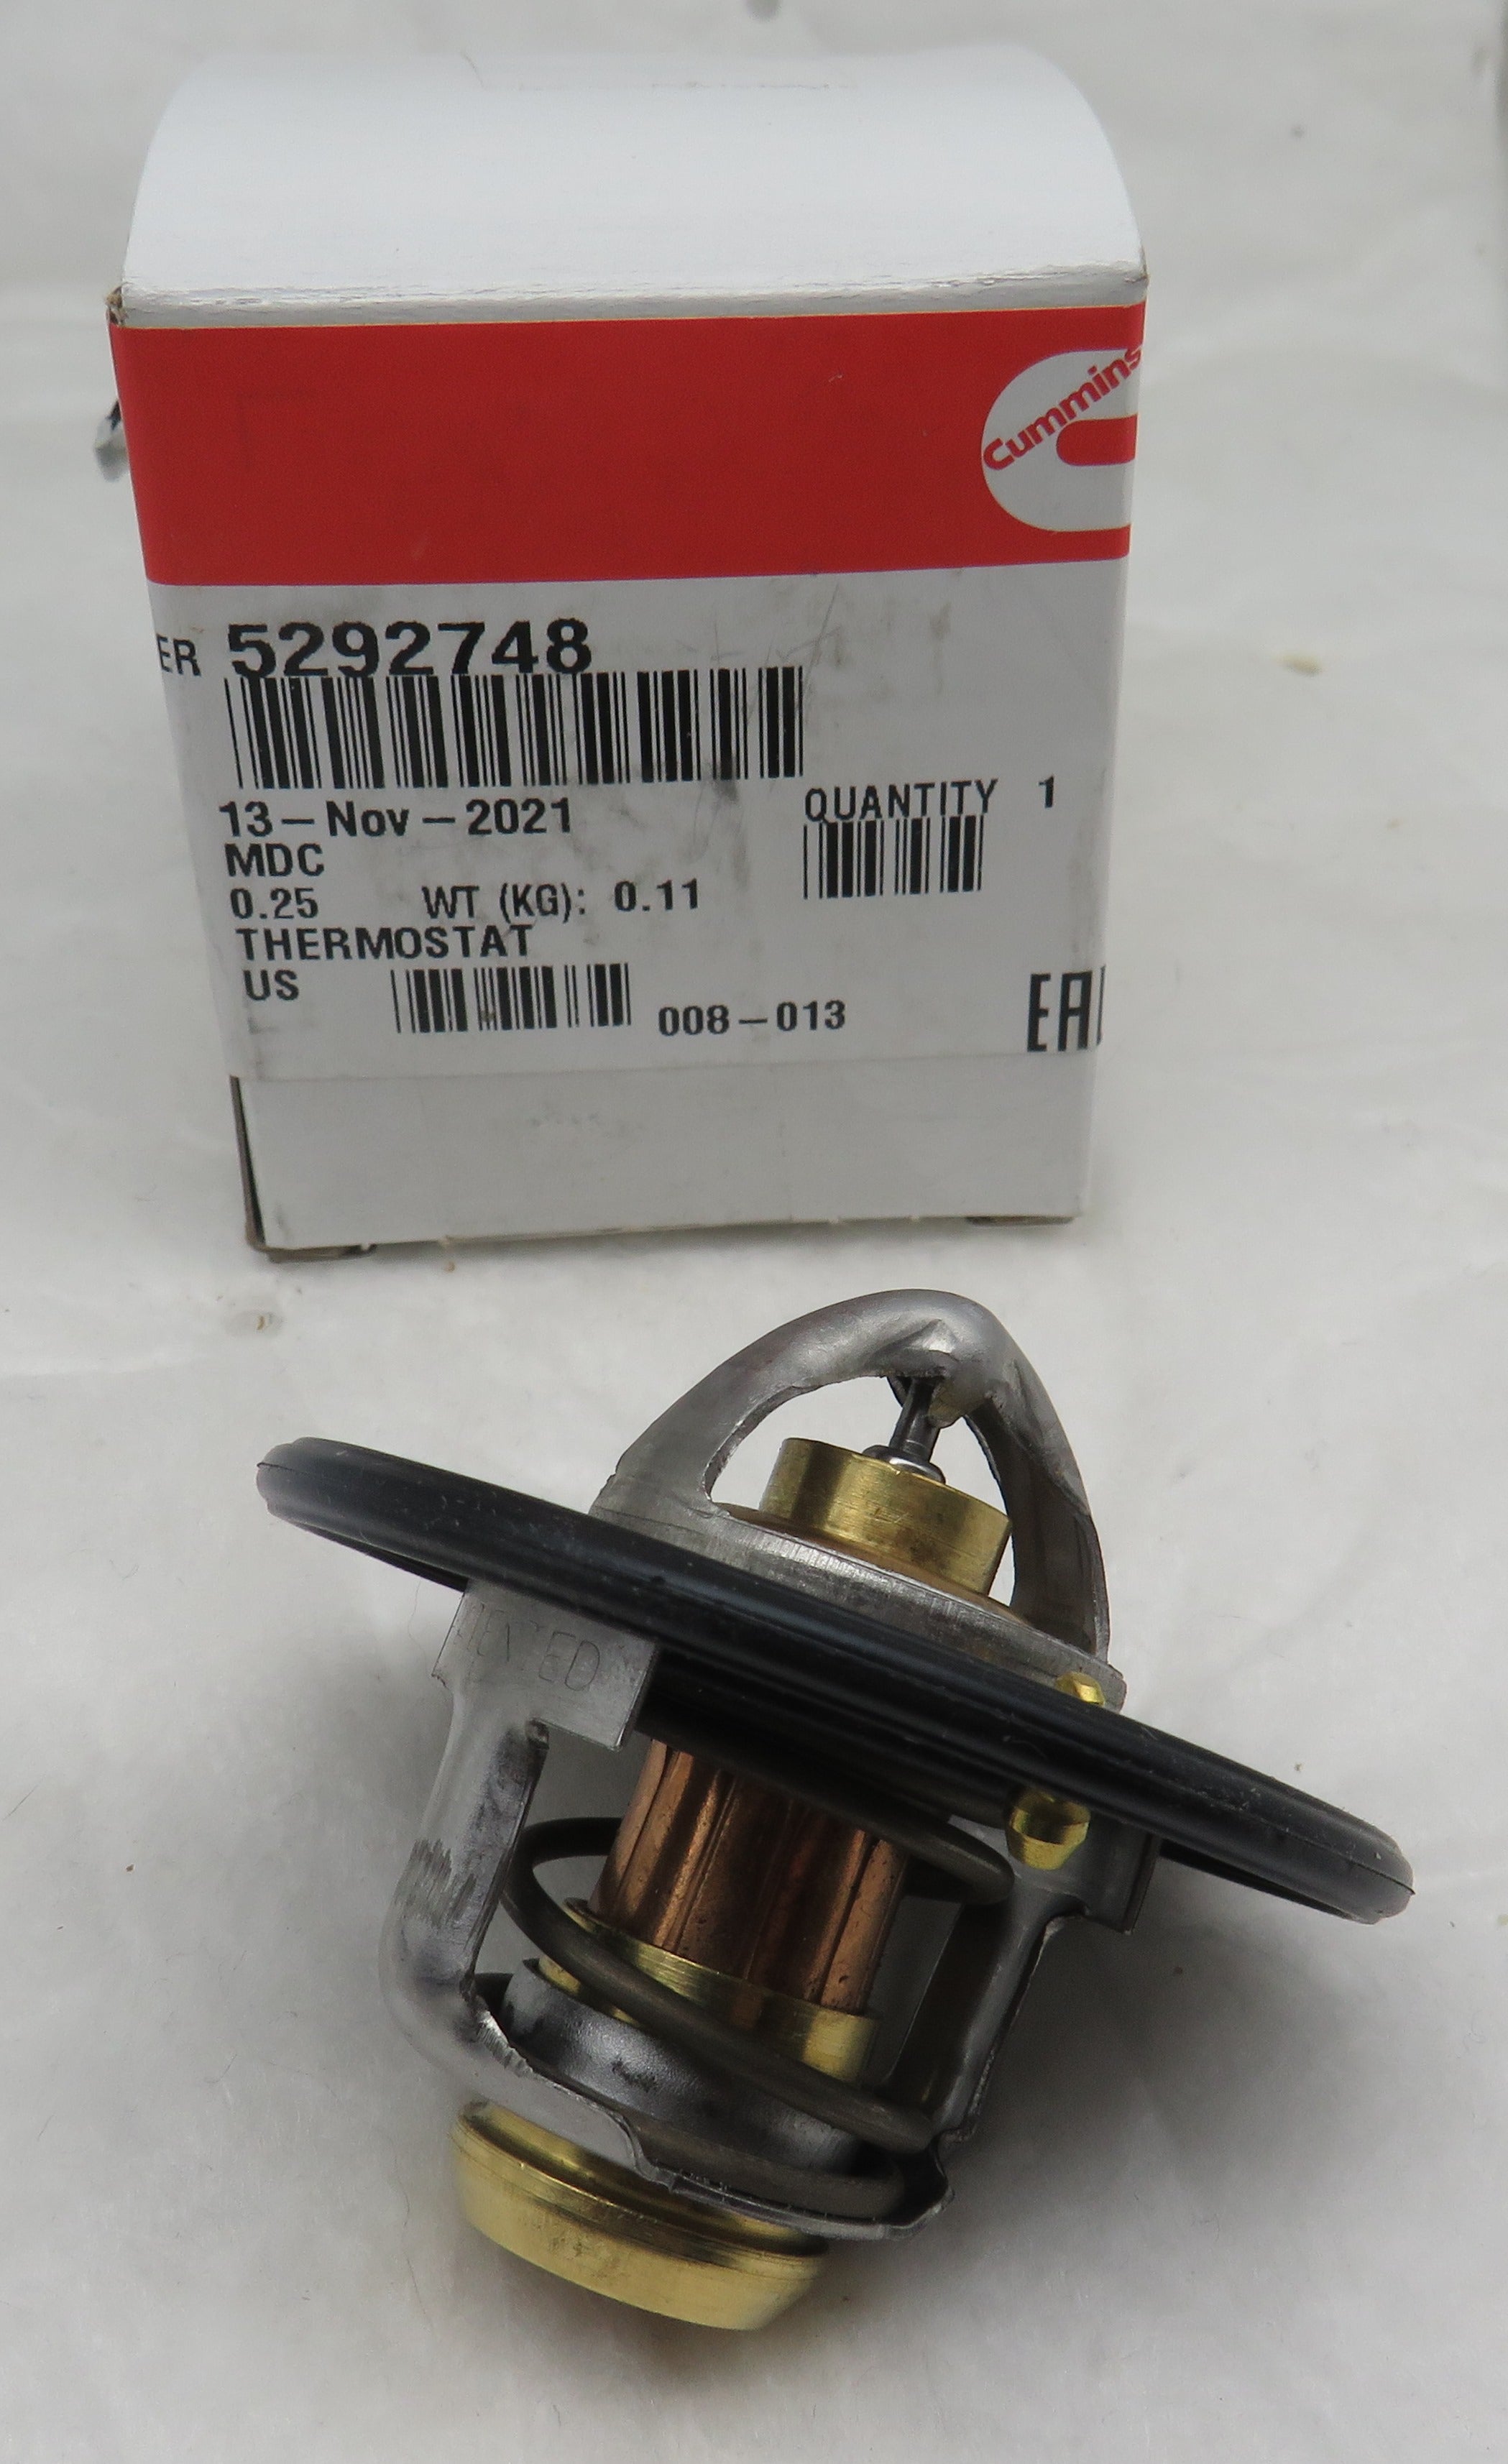 5292748 Cummins Thermostat 3/21/2024 THIS PART IS IN STOCK 3/21/2024